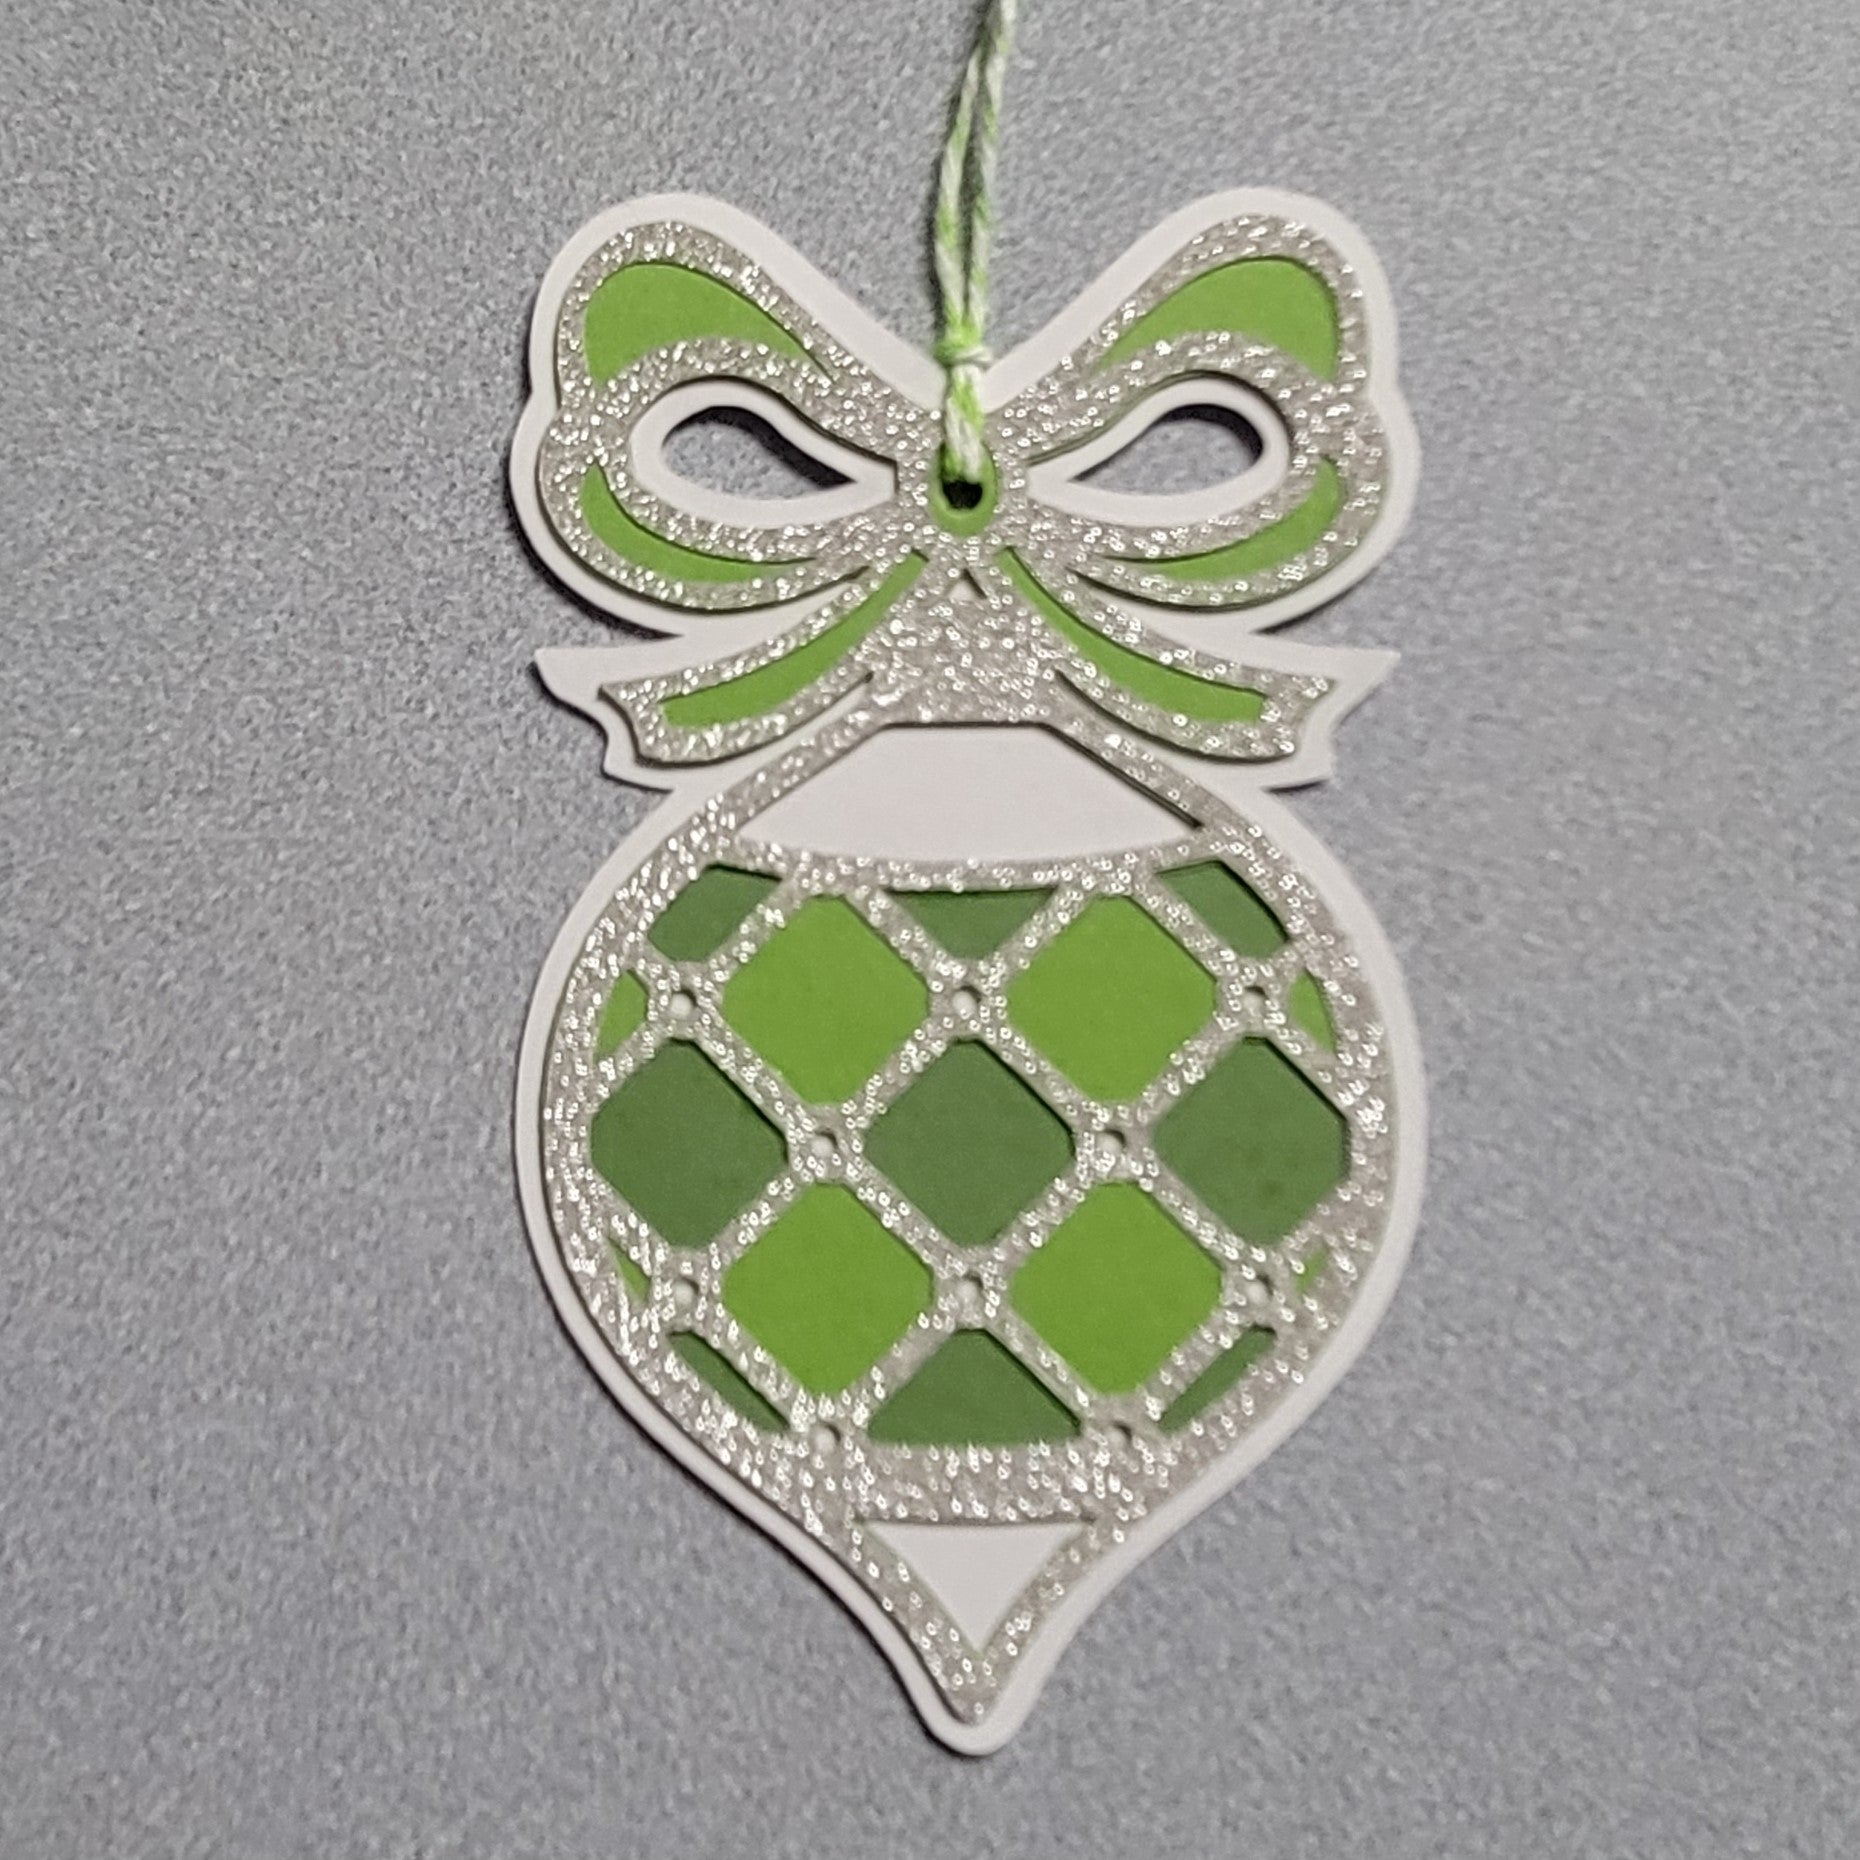 Green and silver ornament gift tag.